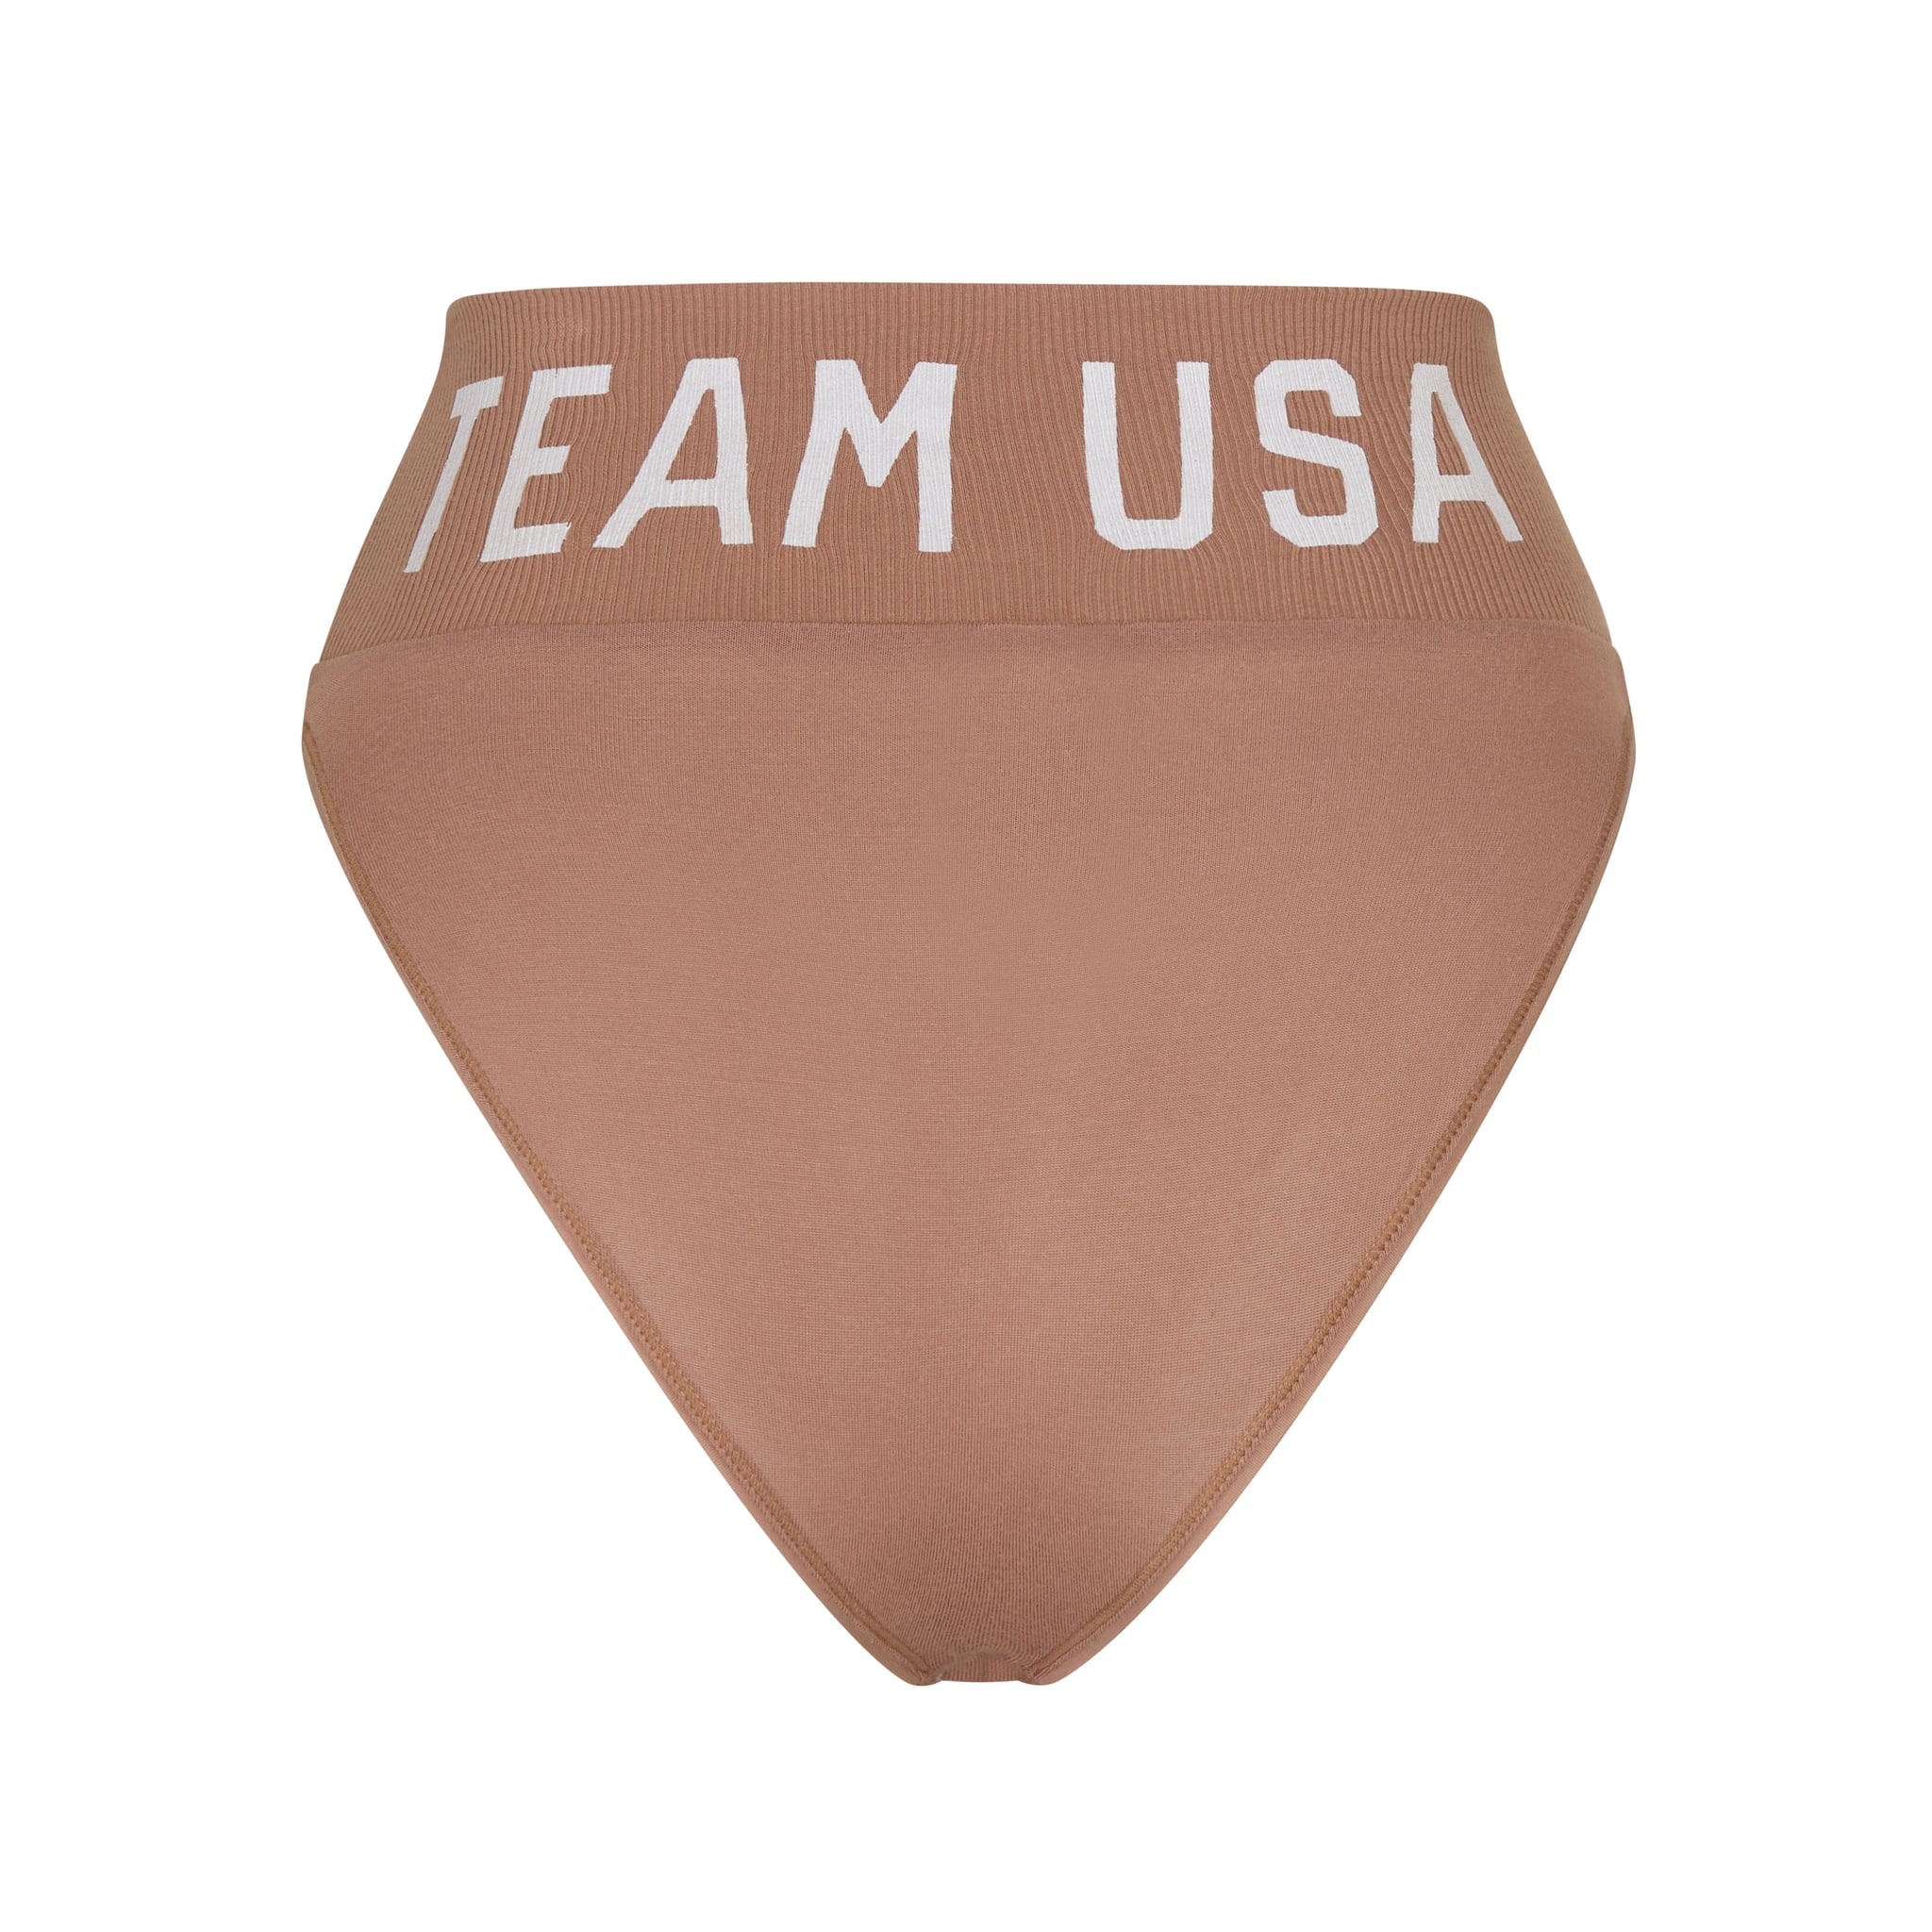 SKIMS Team USA Collection: Shop the SKIMS Olympic Capsule Now